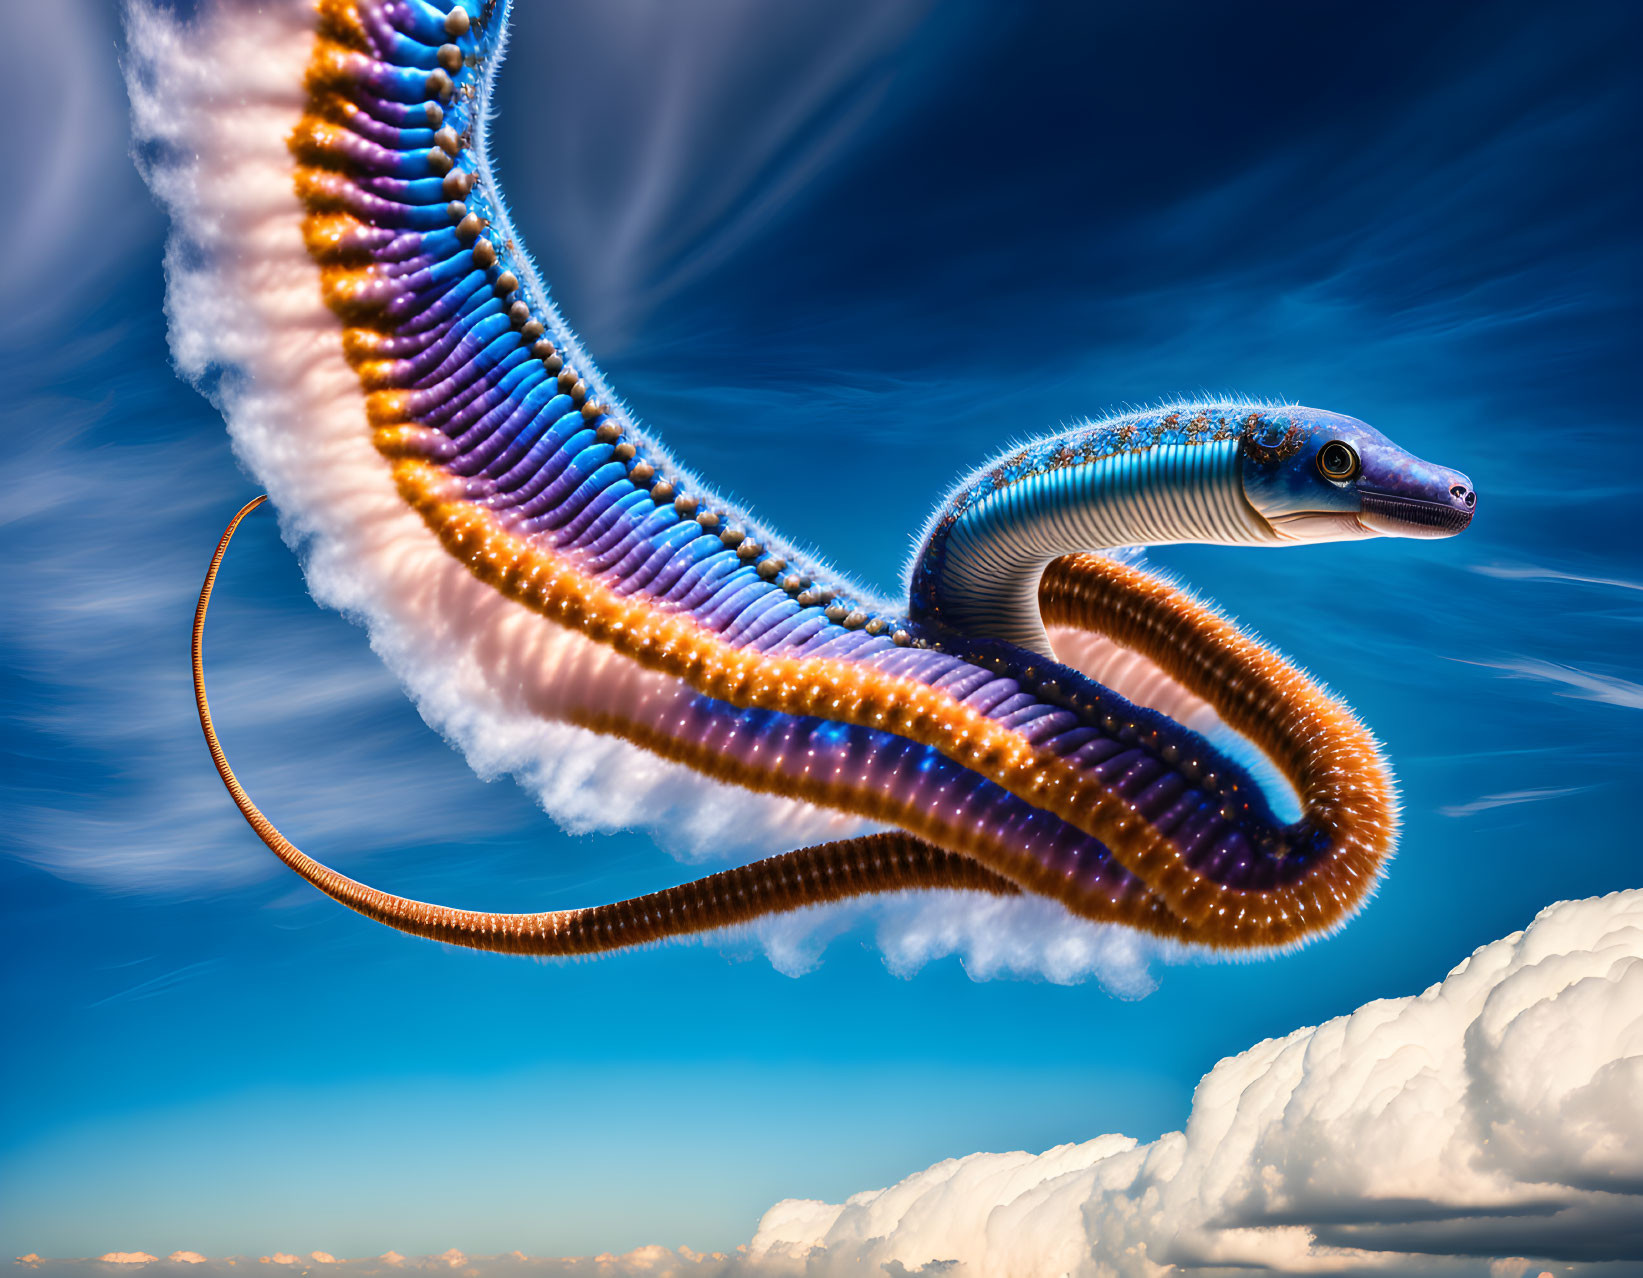 Vibrant multicolored snake gliding in surreal blue sky